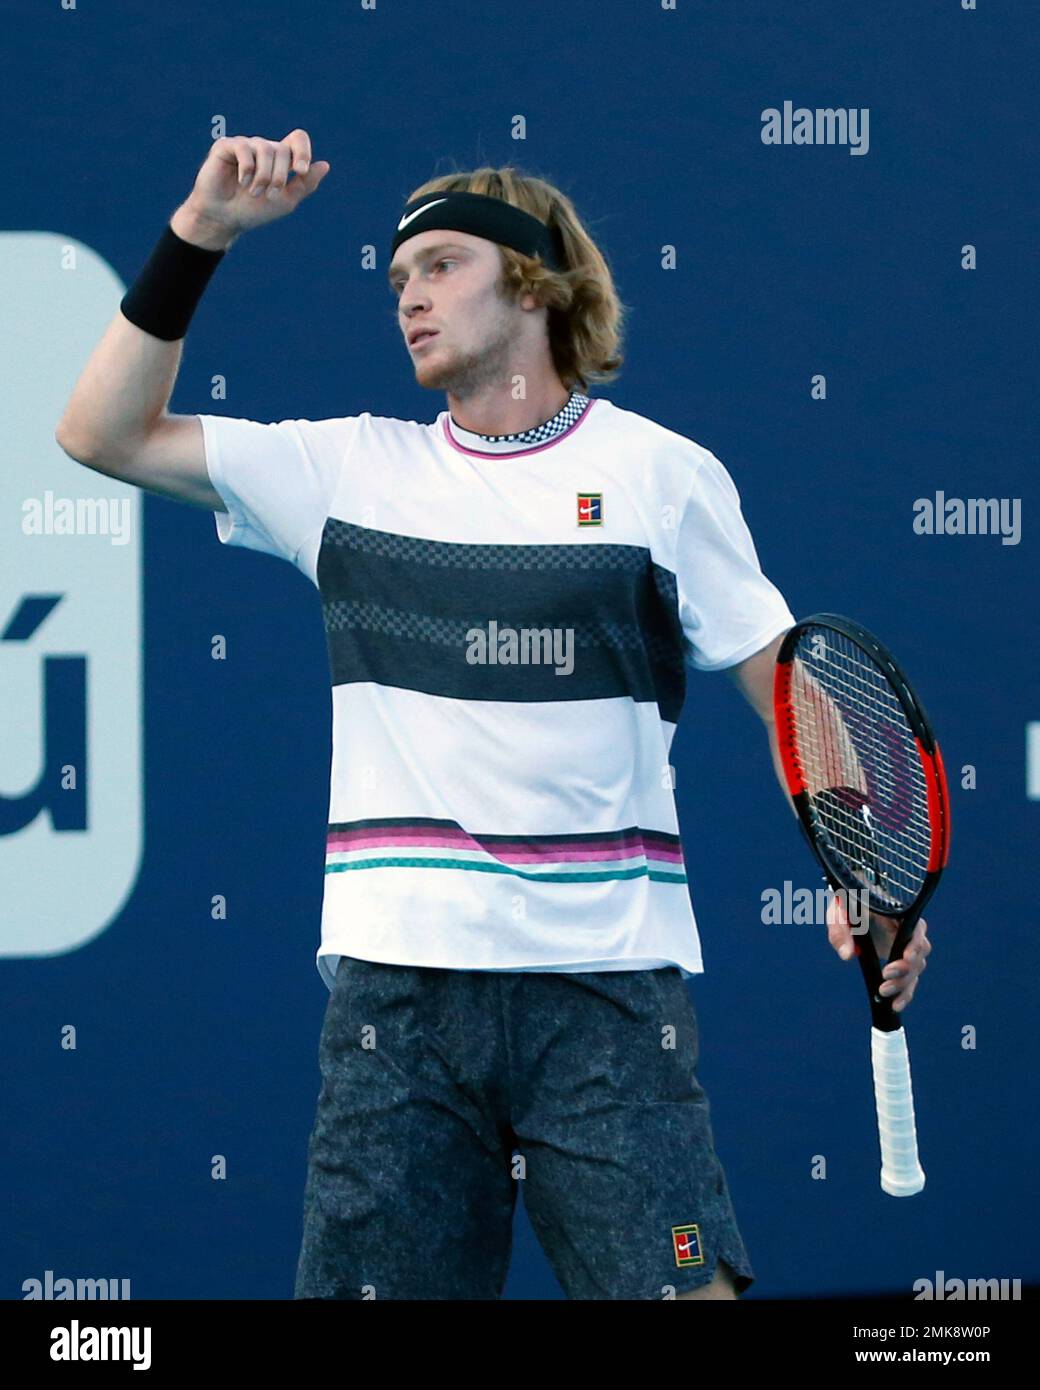 Andrey Rublev, of Russia, reacts after losing a point to Denis Shapovalov, of Canada, during the Miami Open tennis tournament Monday, March 25, 2019, in Miami Gardens, Fla